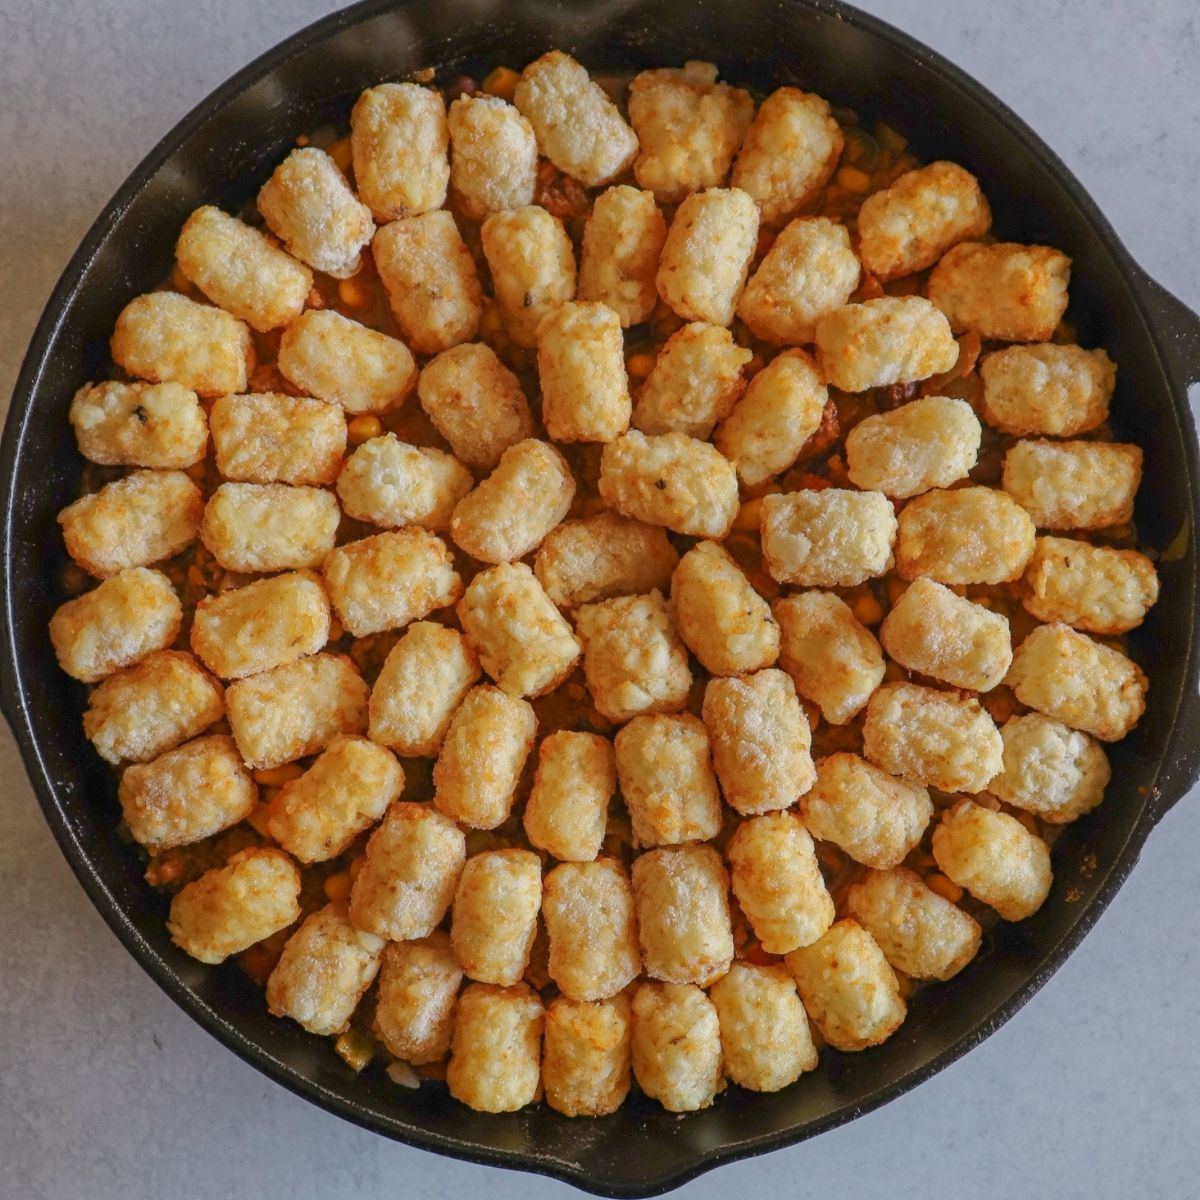 Cast Iron Skillet on grey surface with potato puffs